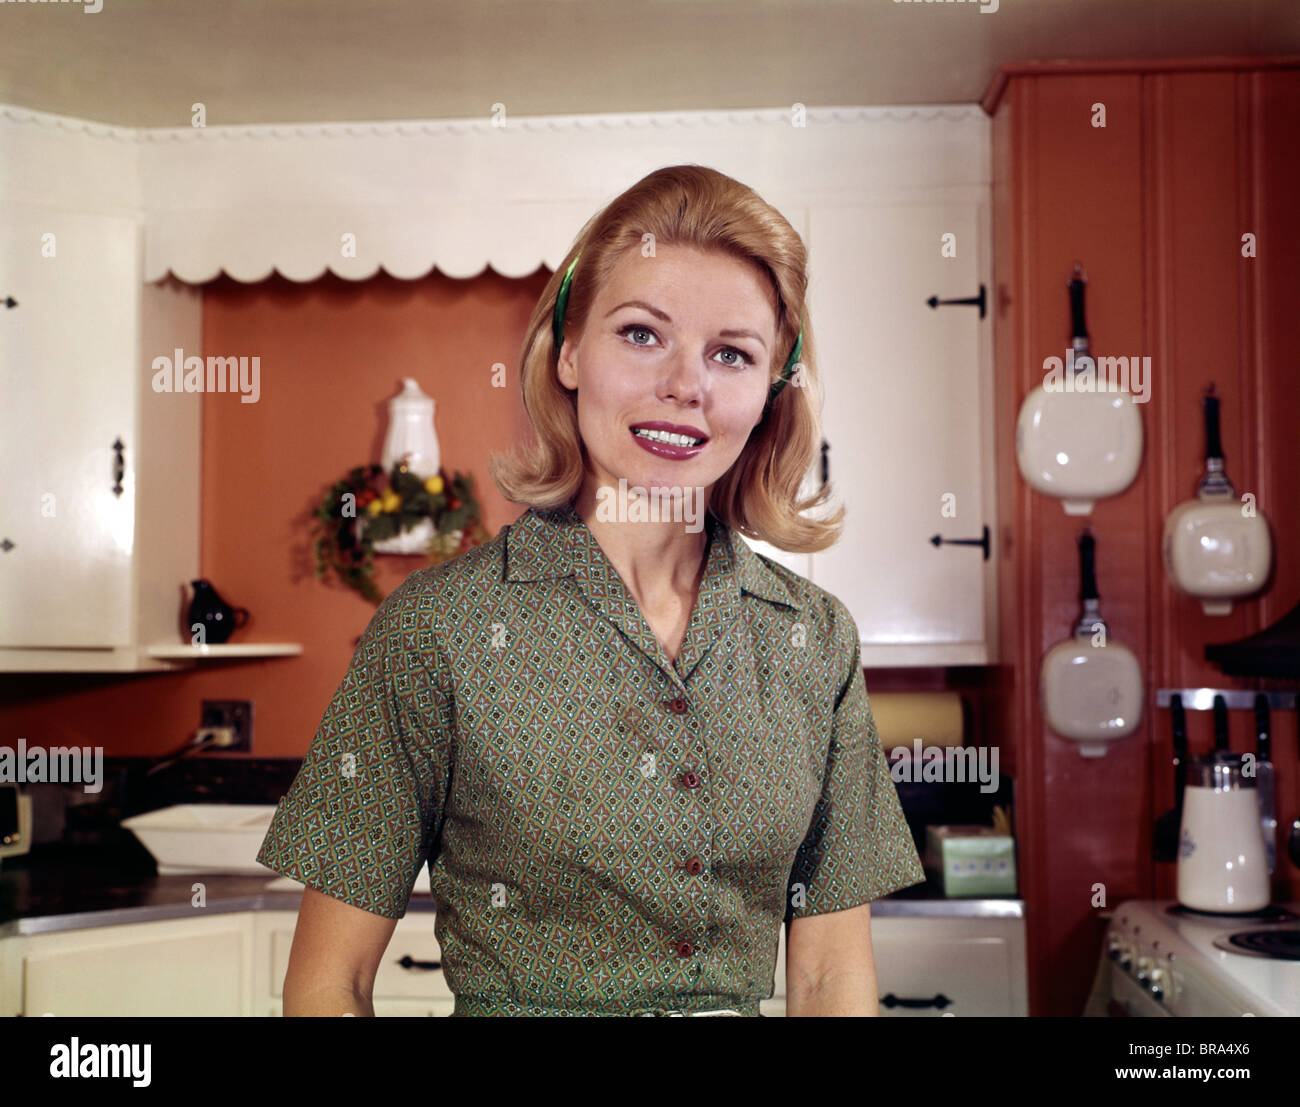 1960s PORTRAIT YOUNG BLONDE WOMAN IN KITCHEN SMILING RETRO Stock Photo